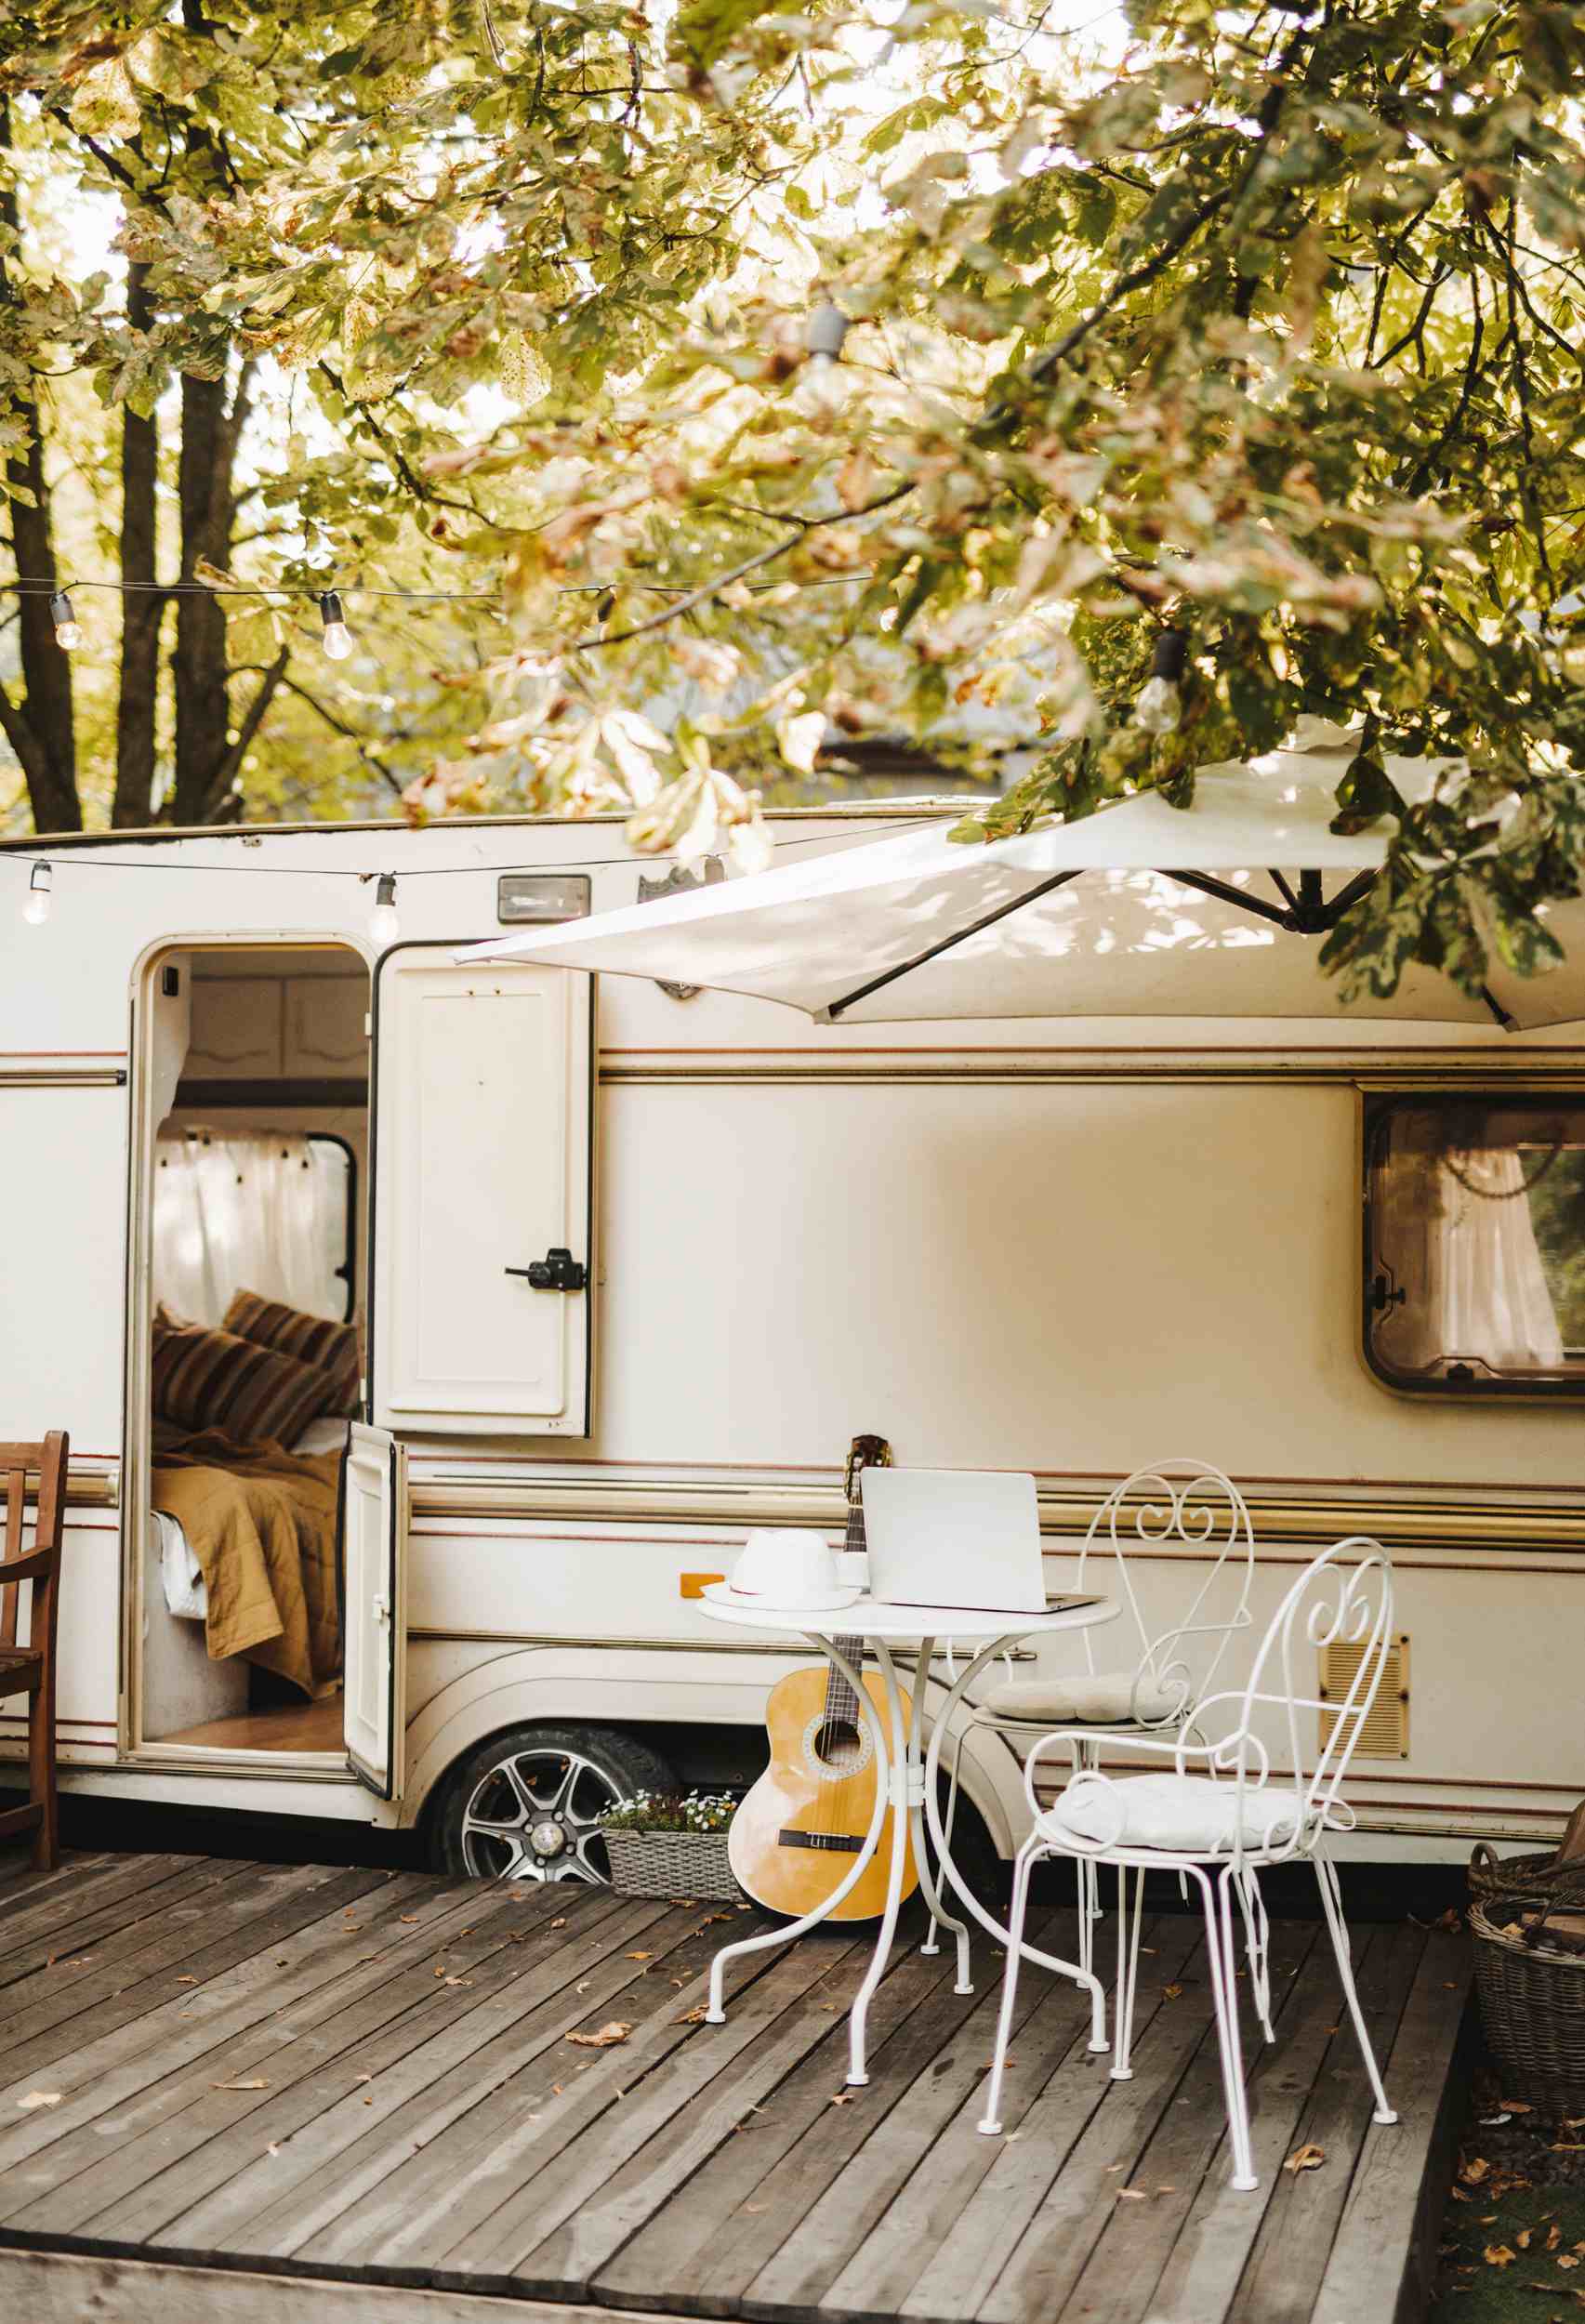 Why Choose To Live In A Mobile Home?